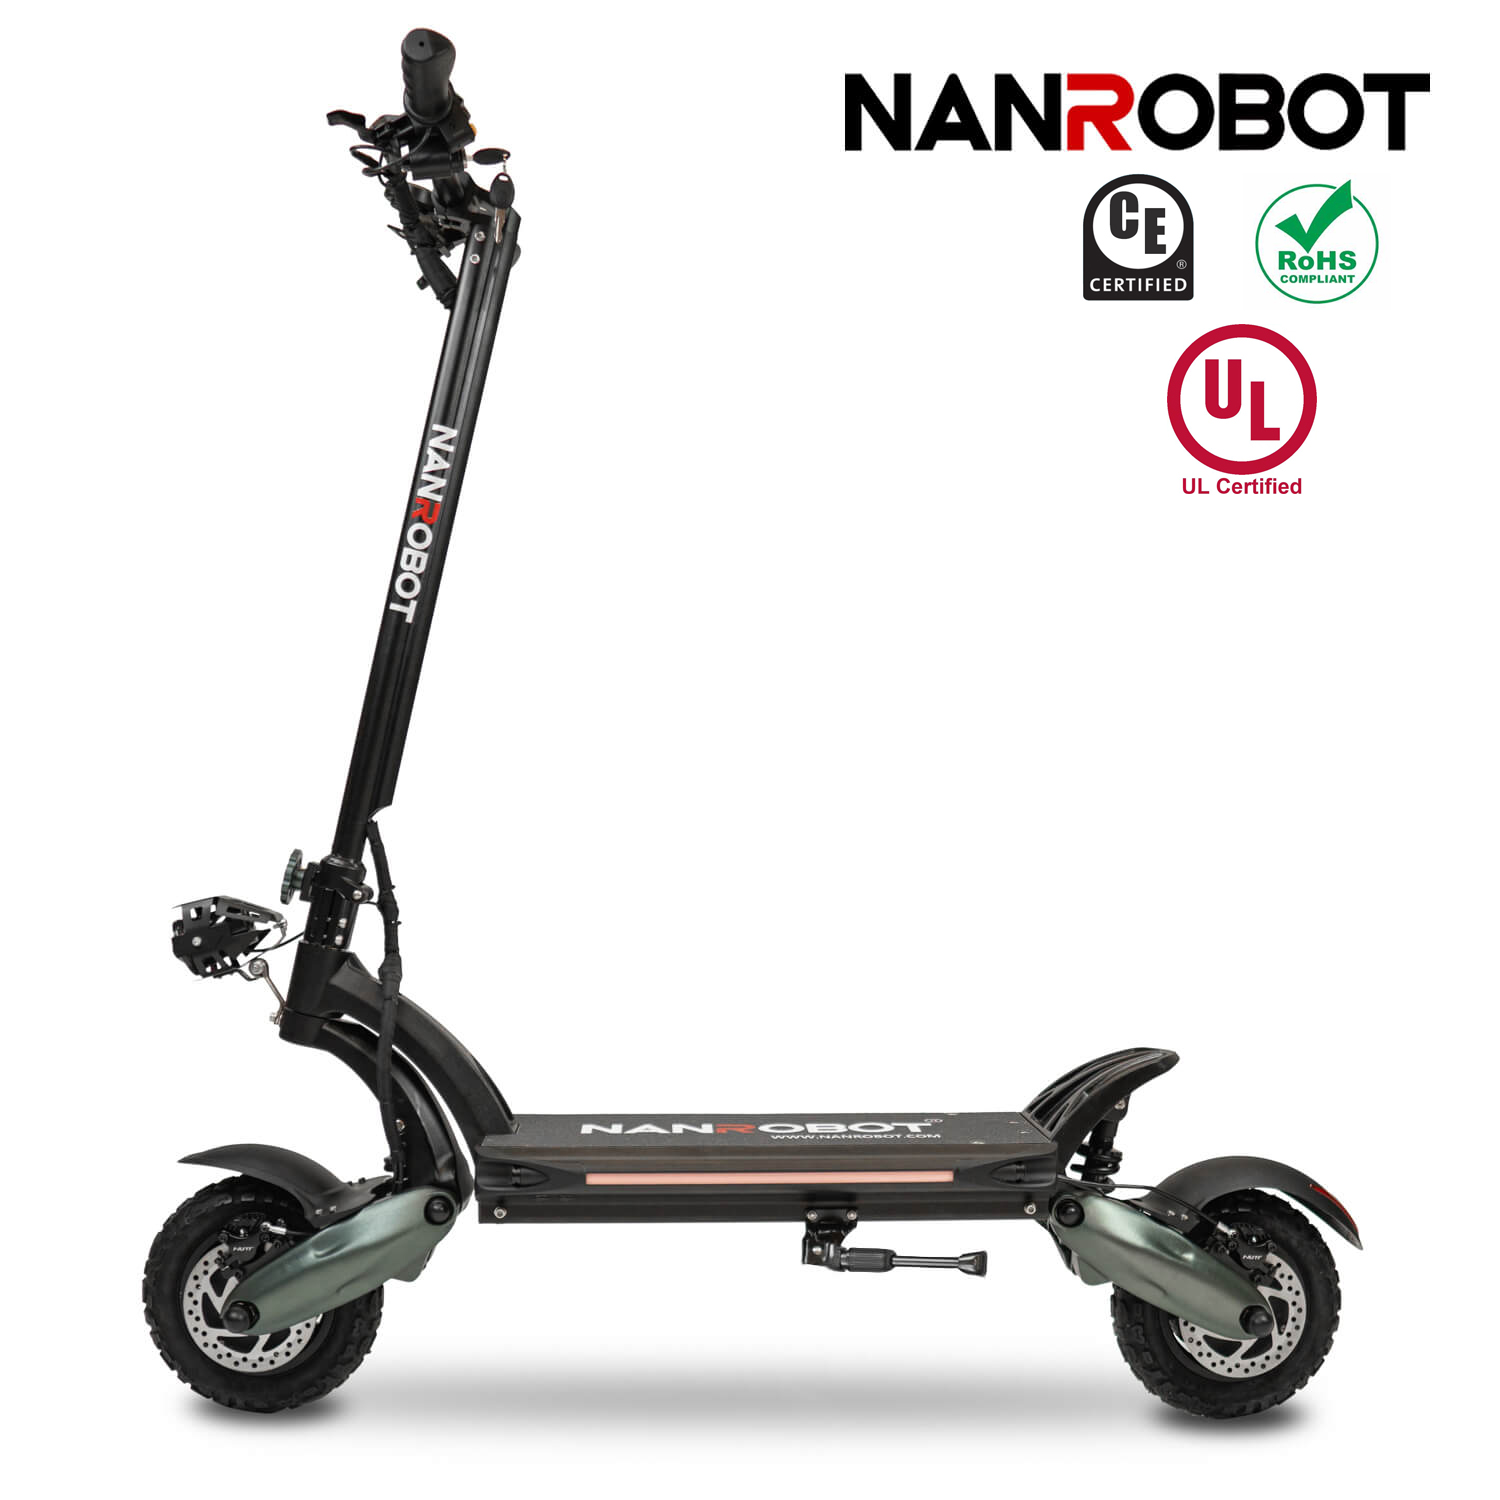 Hot-selling Nanrobot D6+ 1000W*2 Wheels Folding Electric Scooter for Adult